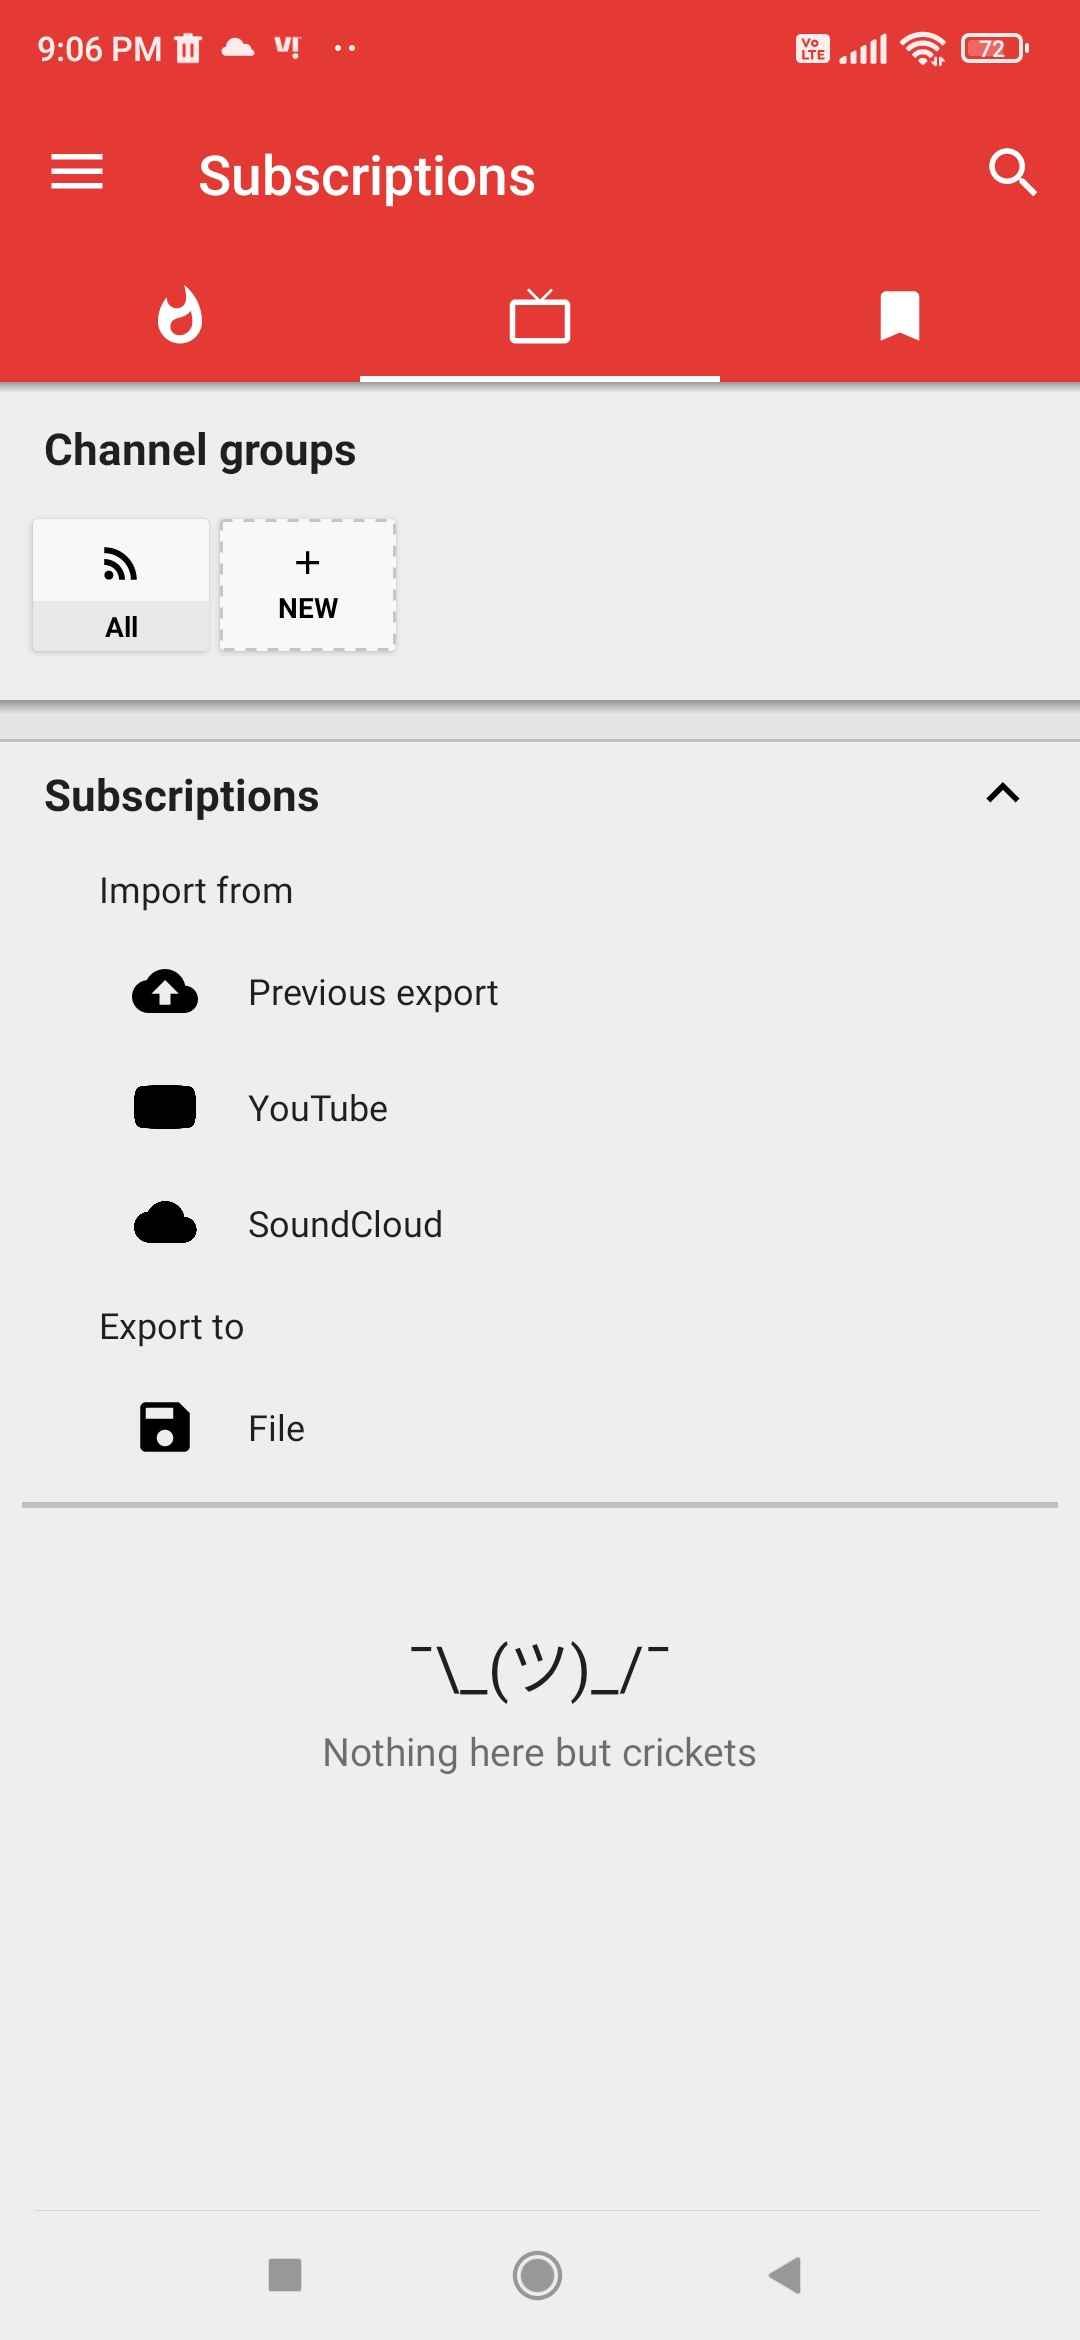 You can import your YouTube subscriptions in NewPipe, or make your own without an account